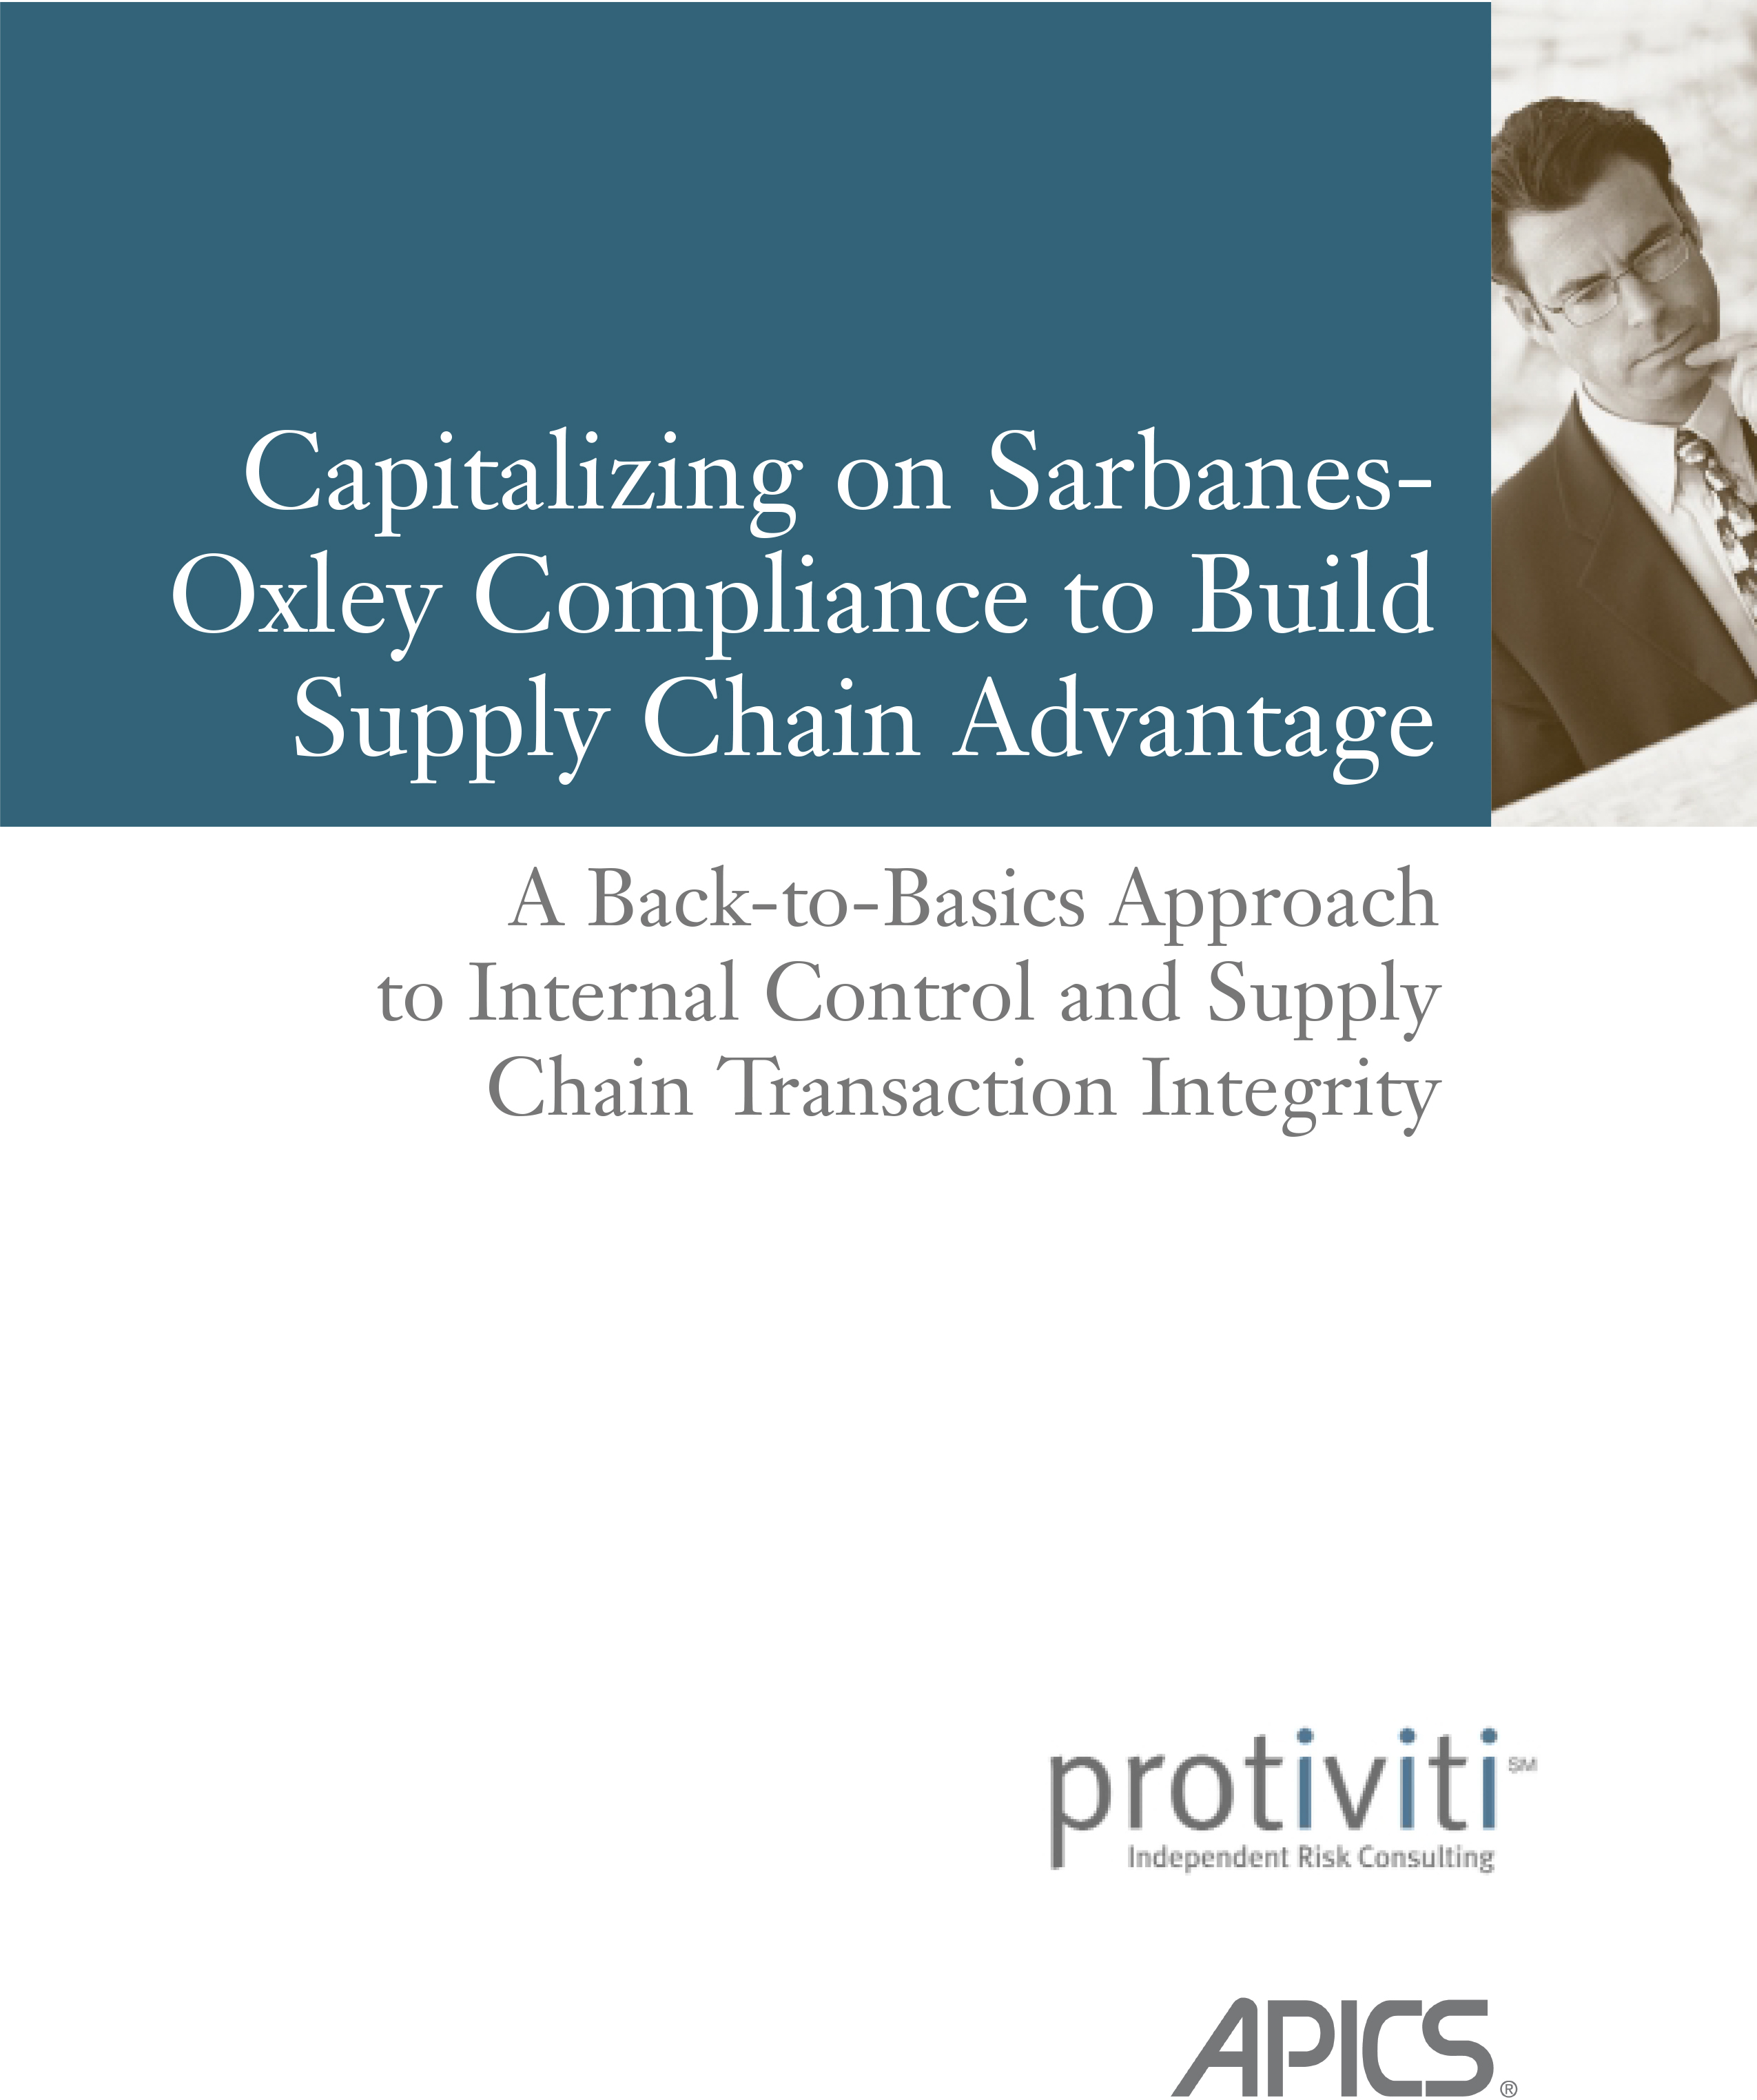 Screenshot of the first page of Capitalizing on Sarbanes-Oxley Compliance to Build Supply Chain Advantage